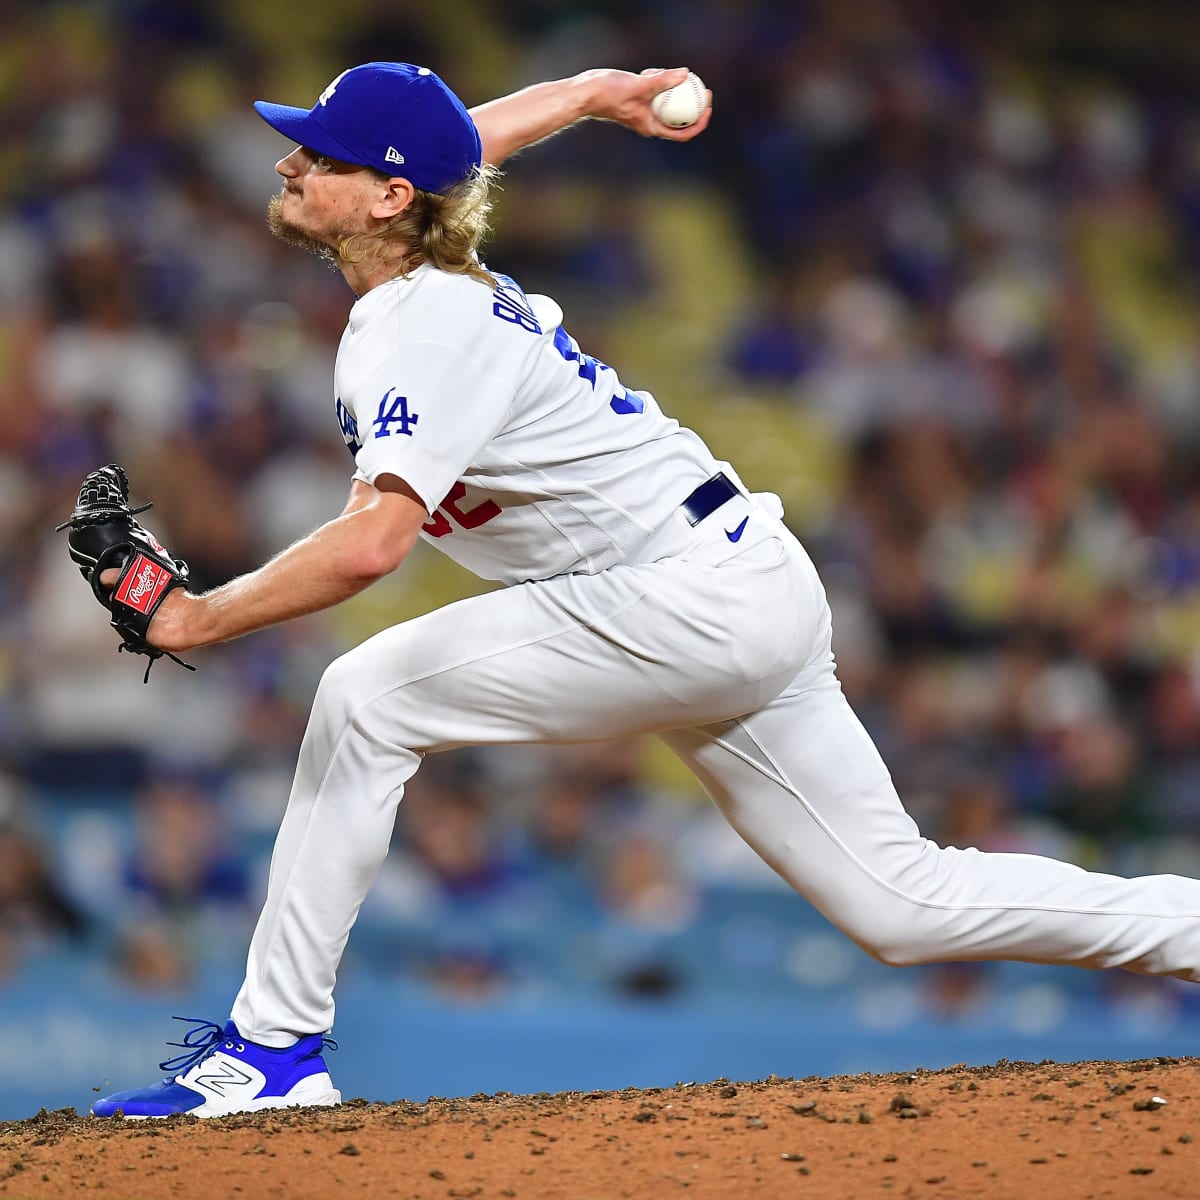 Mets acquire lefty relievers, Torres and Blevins